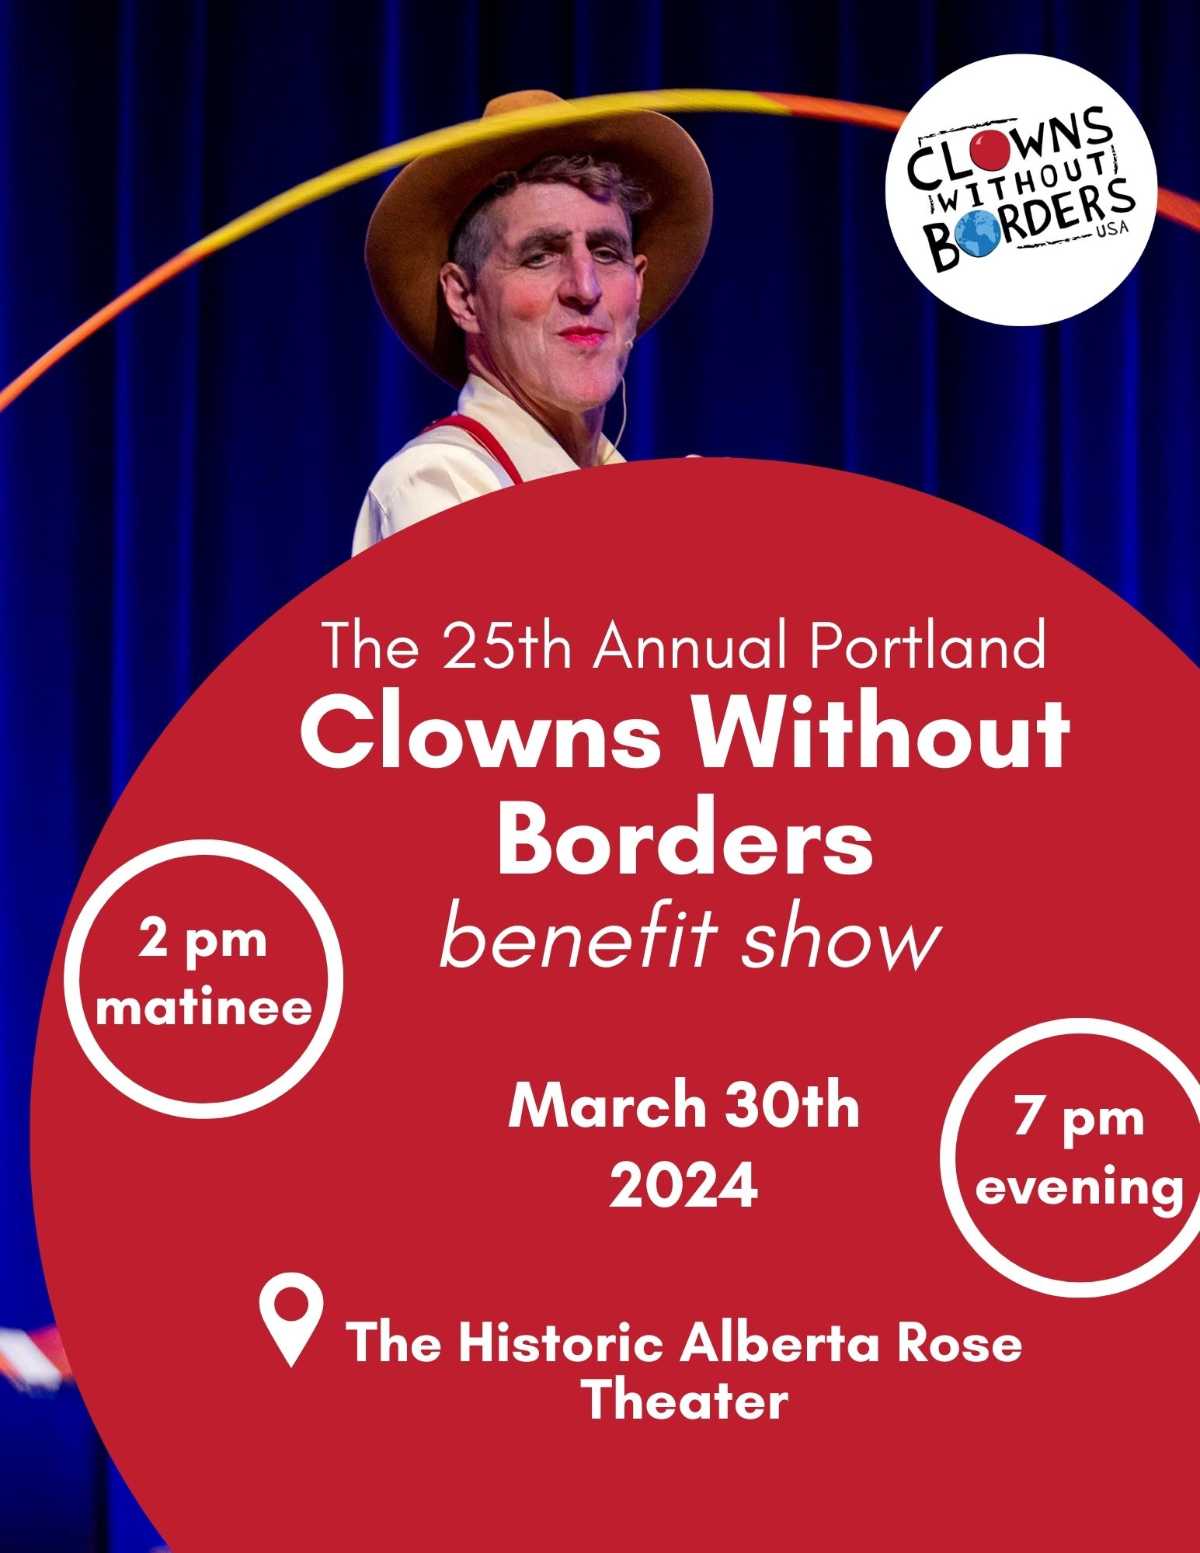 The 25th Annual Portland Clowns Without Borders Benefit Show